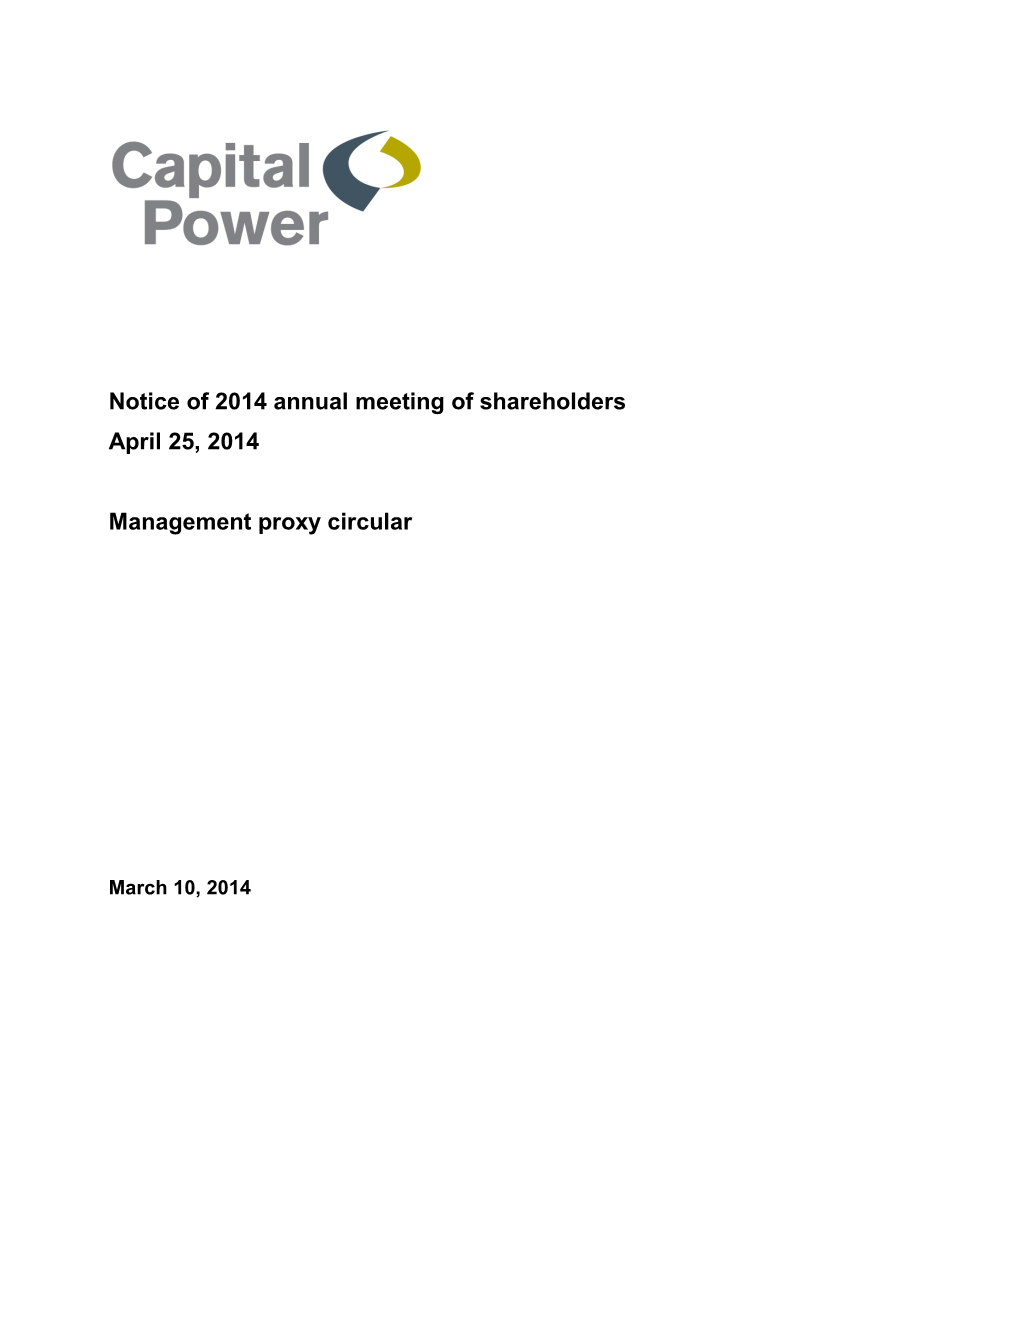 Notice of 2014 Annual Meeting of Shareholders April 25, 2014